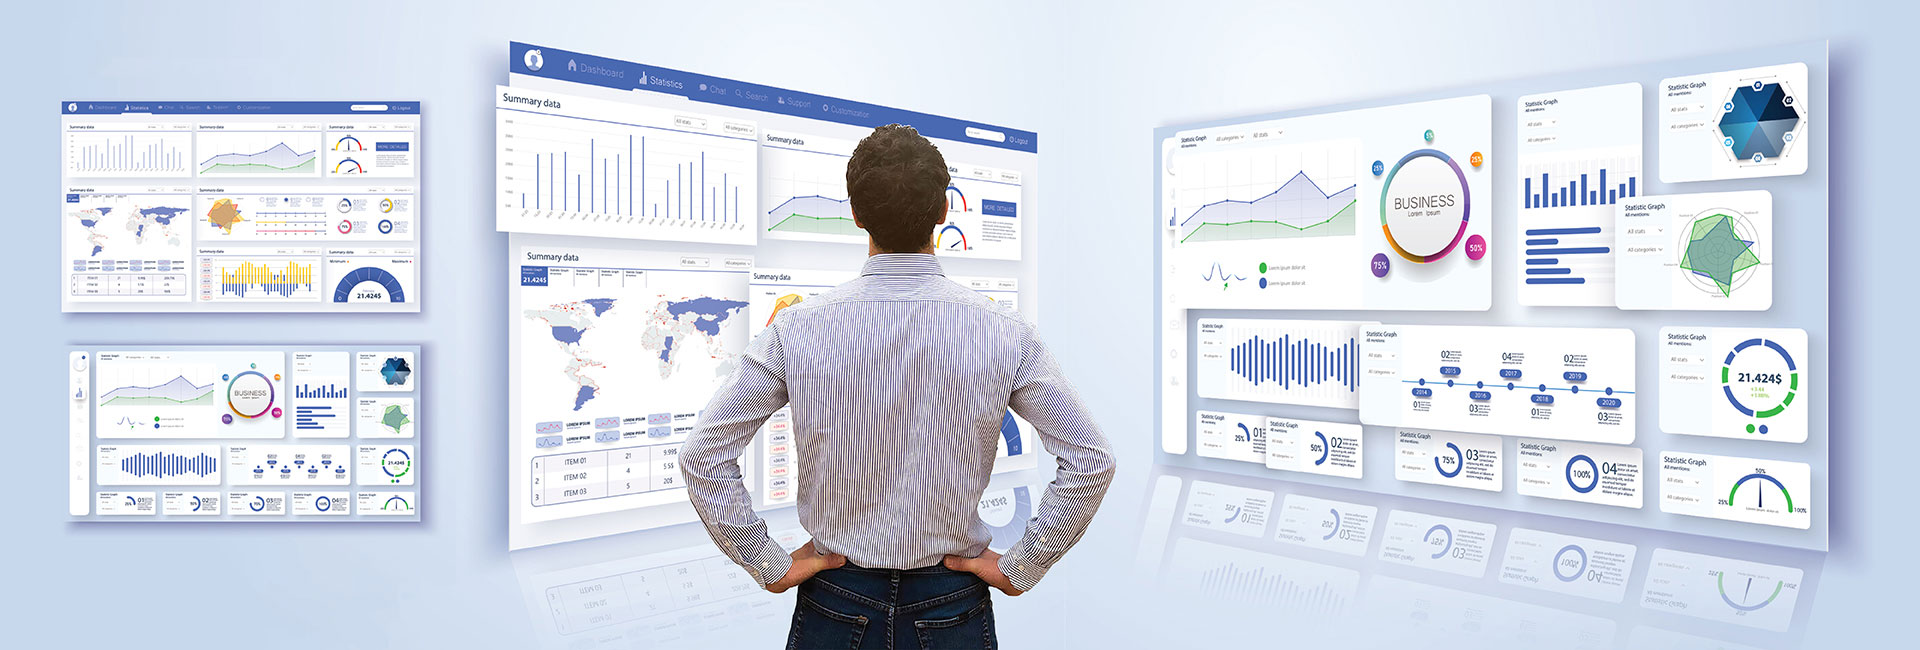 A Smart Guide to Business Intelligence Dashboards